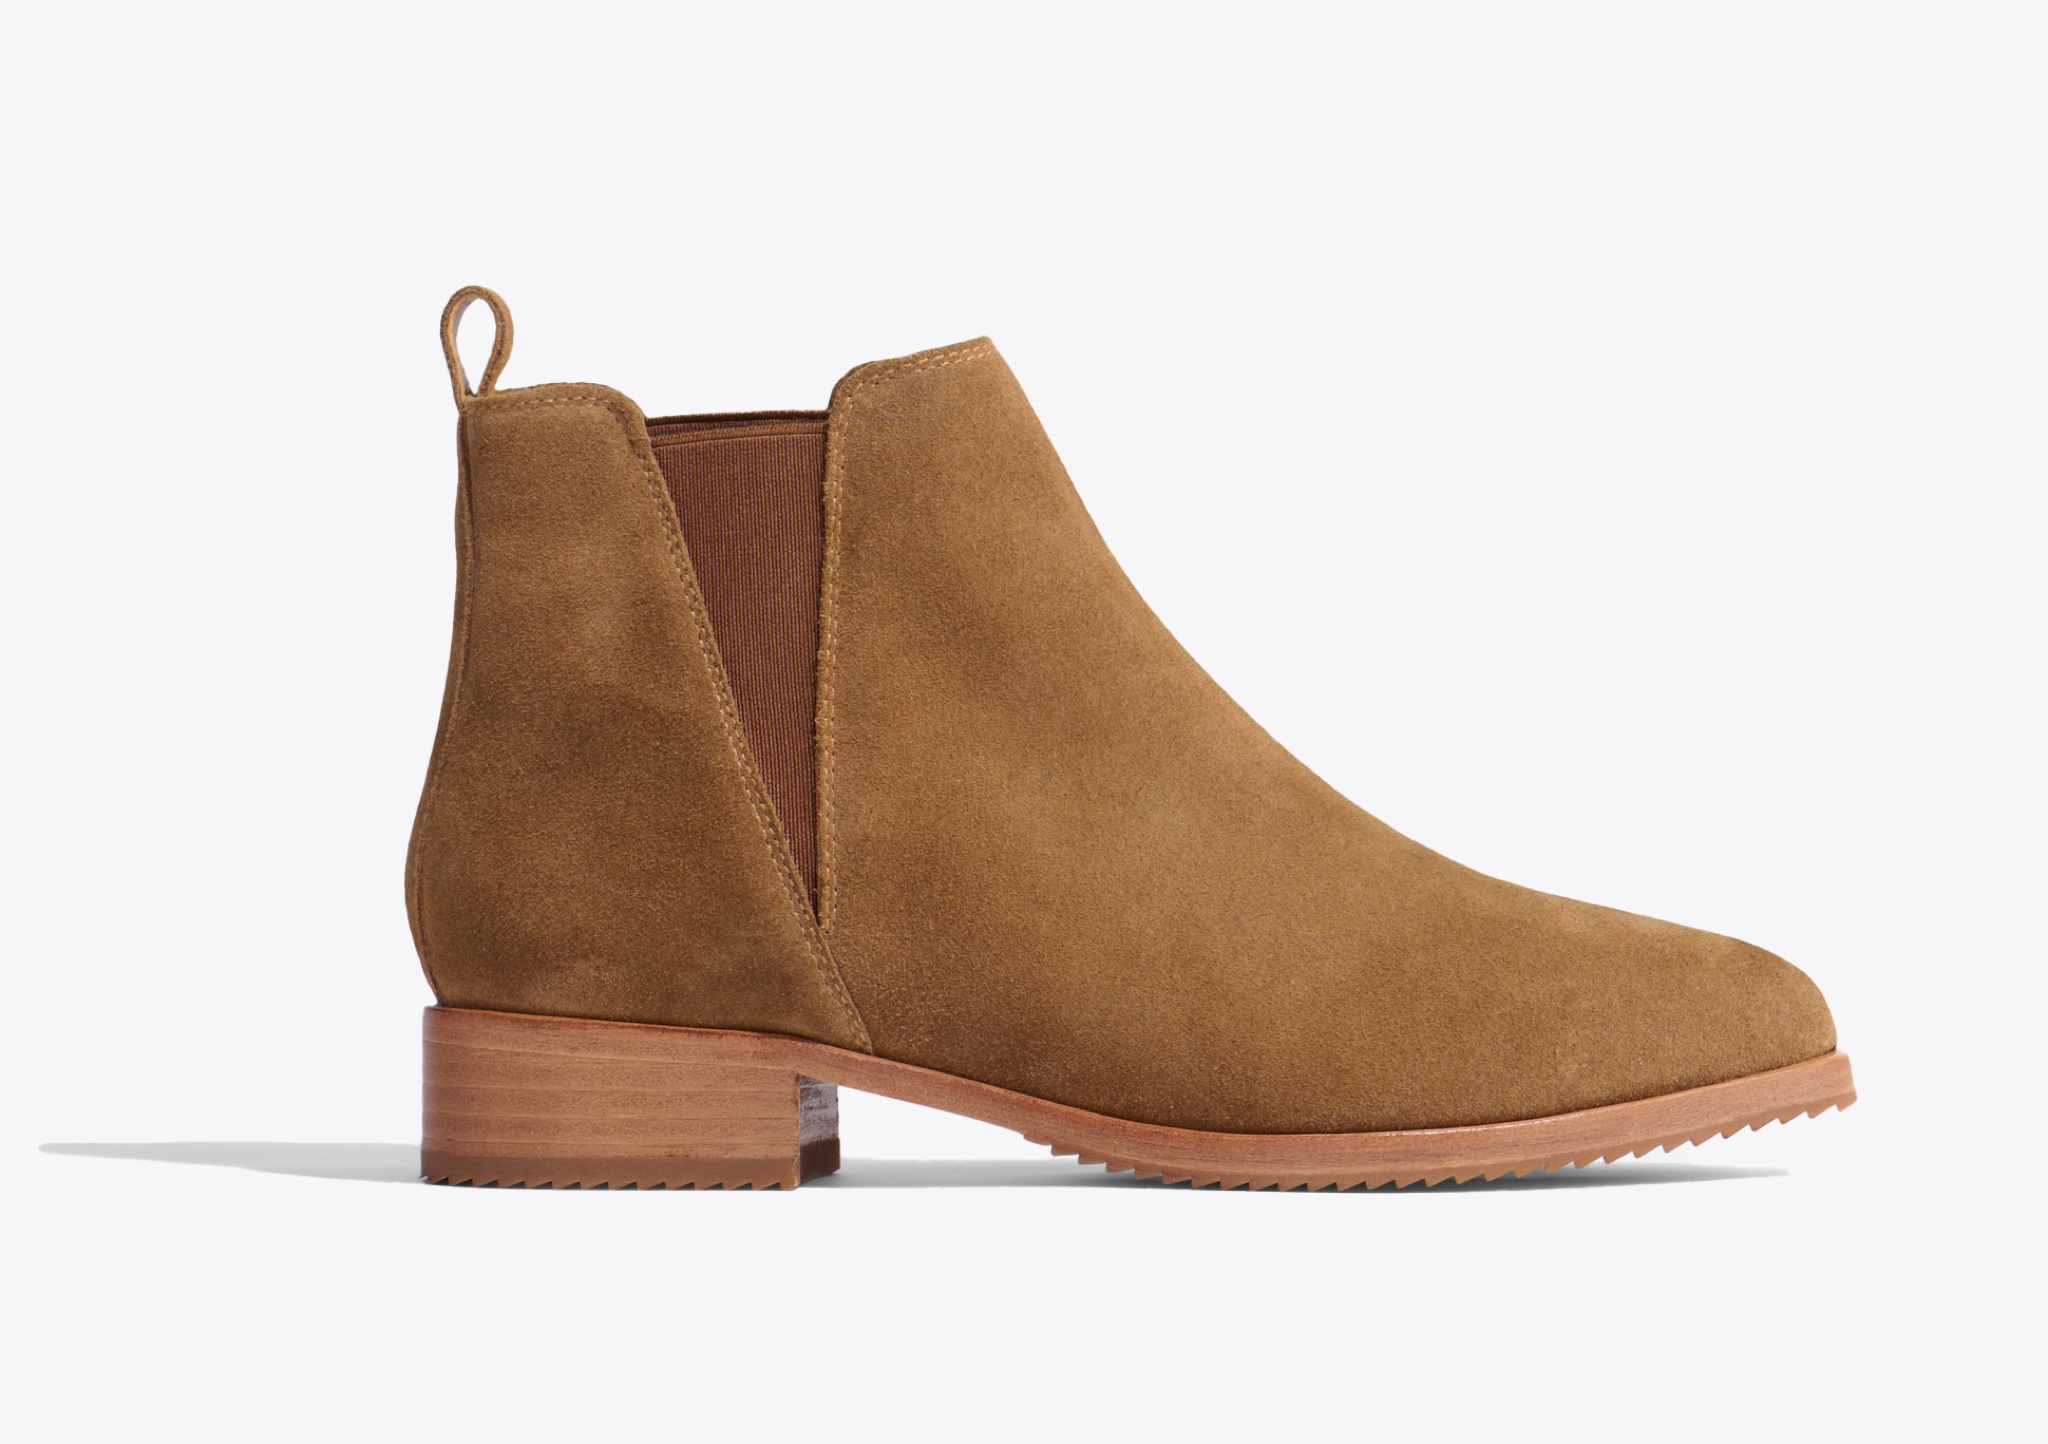 Nisolo Eva Everyday Chelsea Boot Taupe Suede - Every Nisolo product is built on the foundation of comfort, function, and design. 